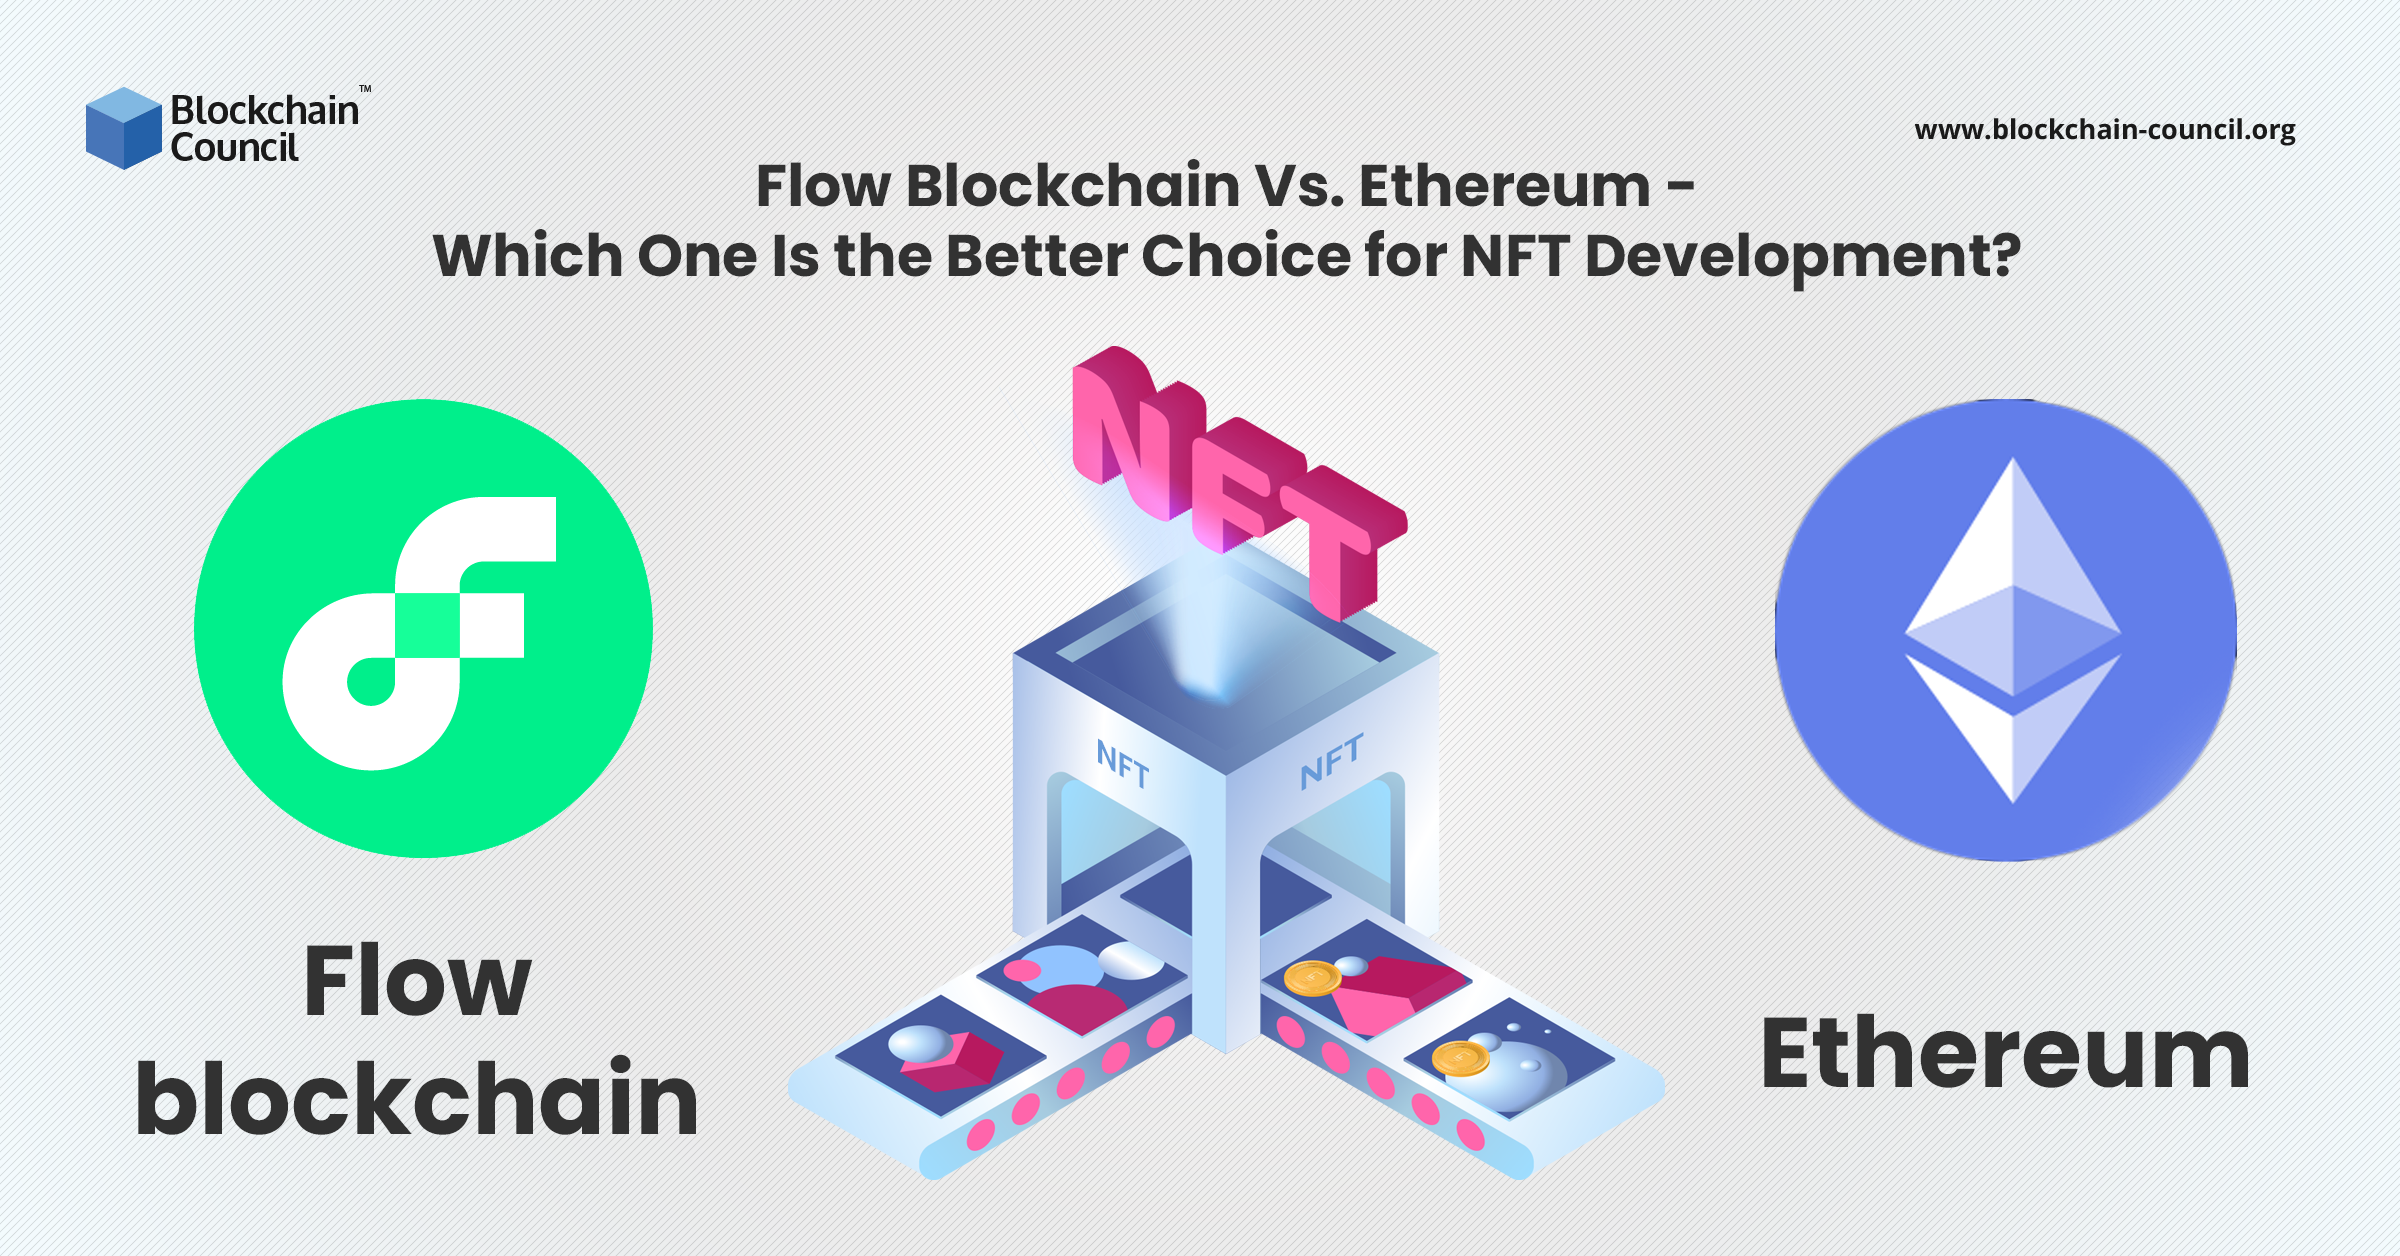 Flow Blockchain Vs. Ethereum – Which One Is the Better Choice for NFT Development?